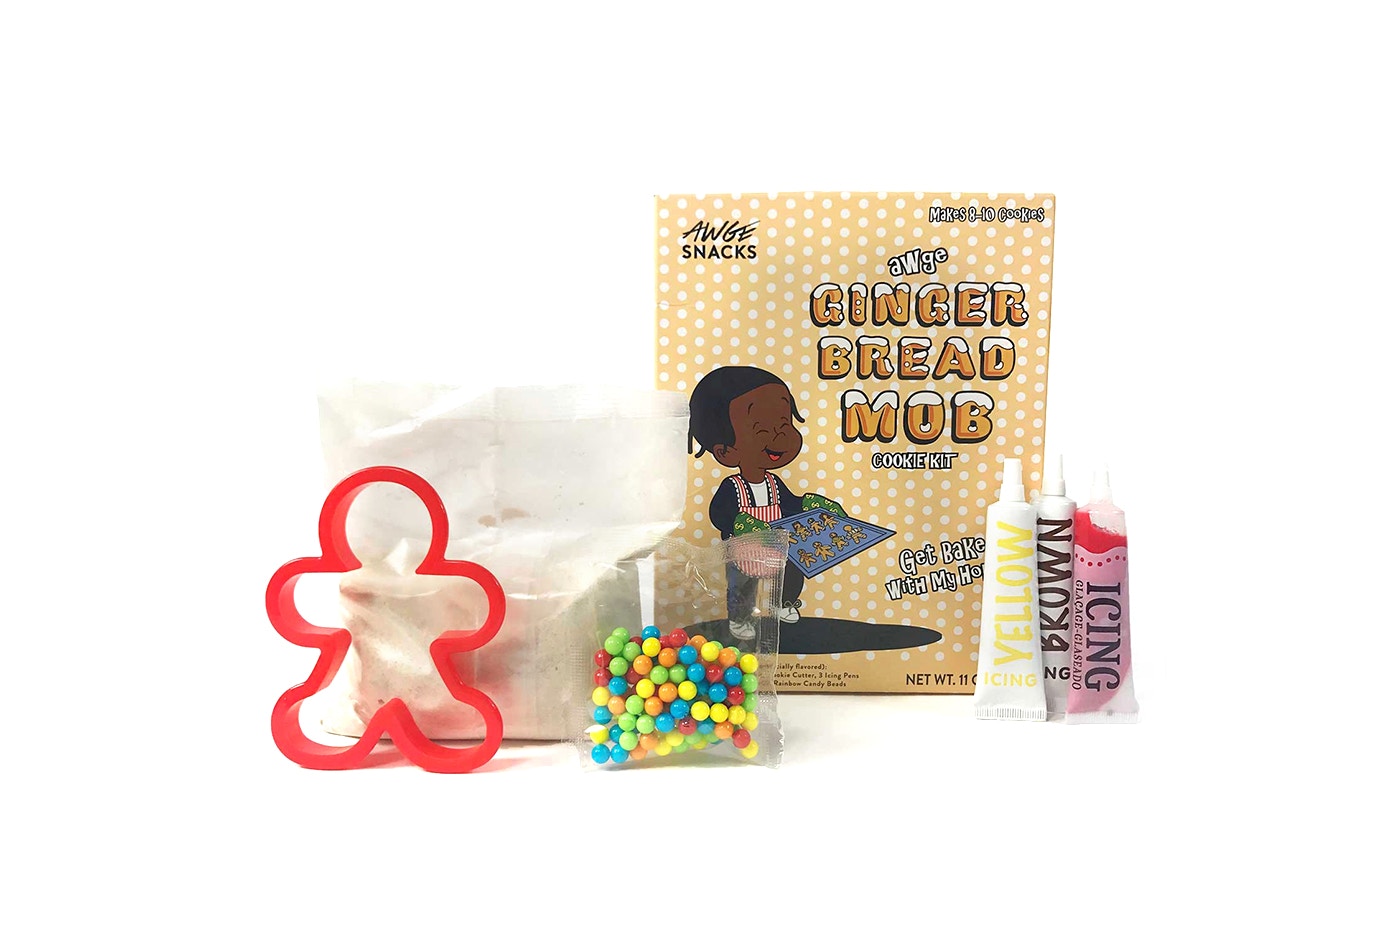 A$AP Rocky Releases ‘Ginger Bread Mob’ Cookie Kit